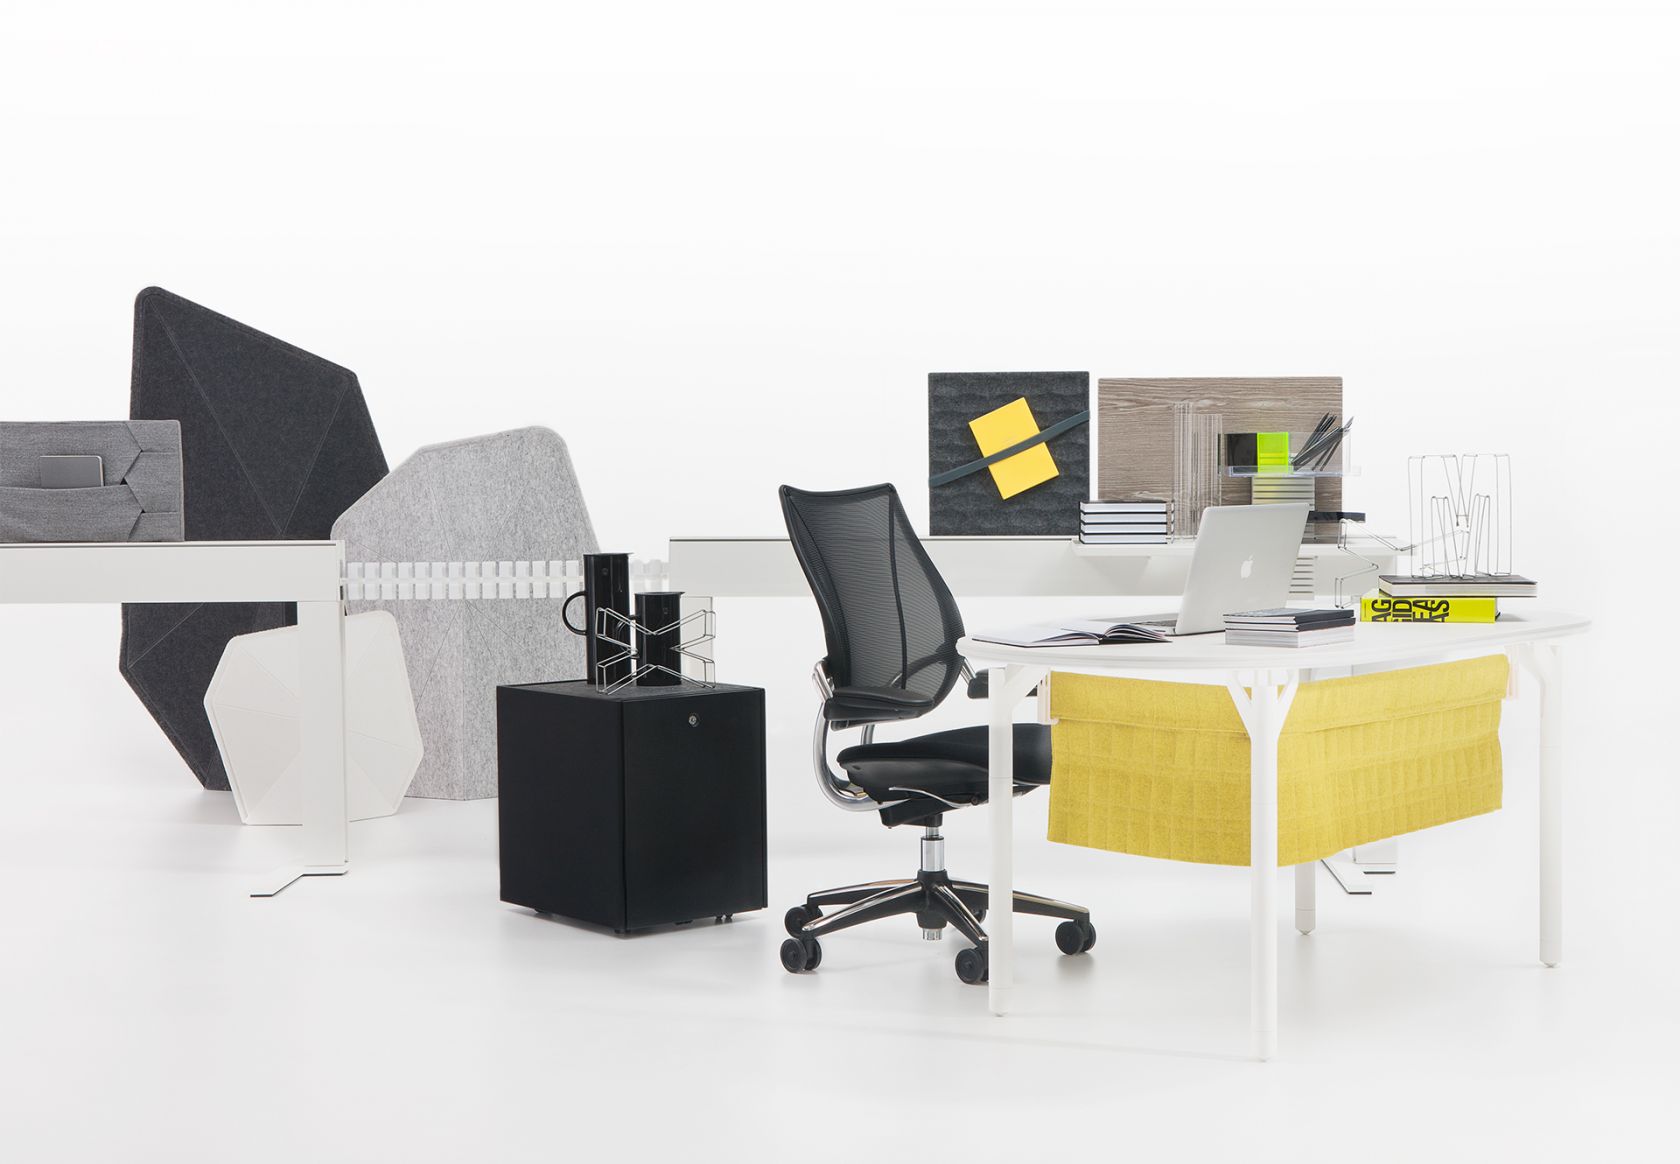 Climate Workstation, Diffrient World Task Chair, Soft Boundary, Arch Modesty Panel and Storage Box